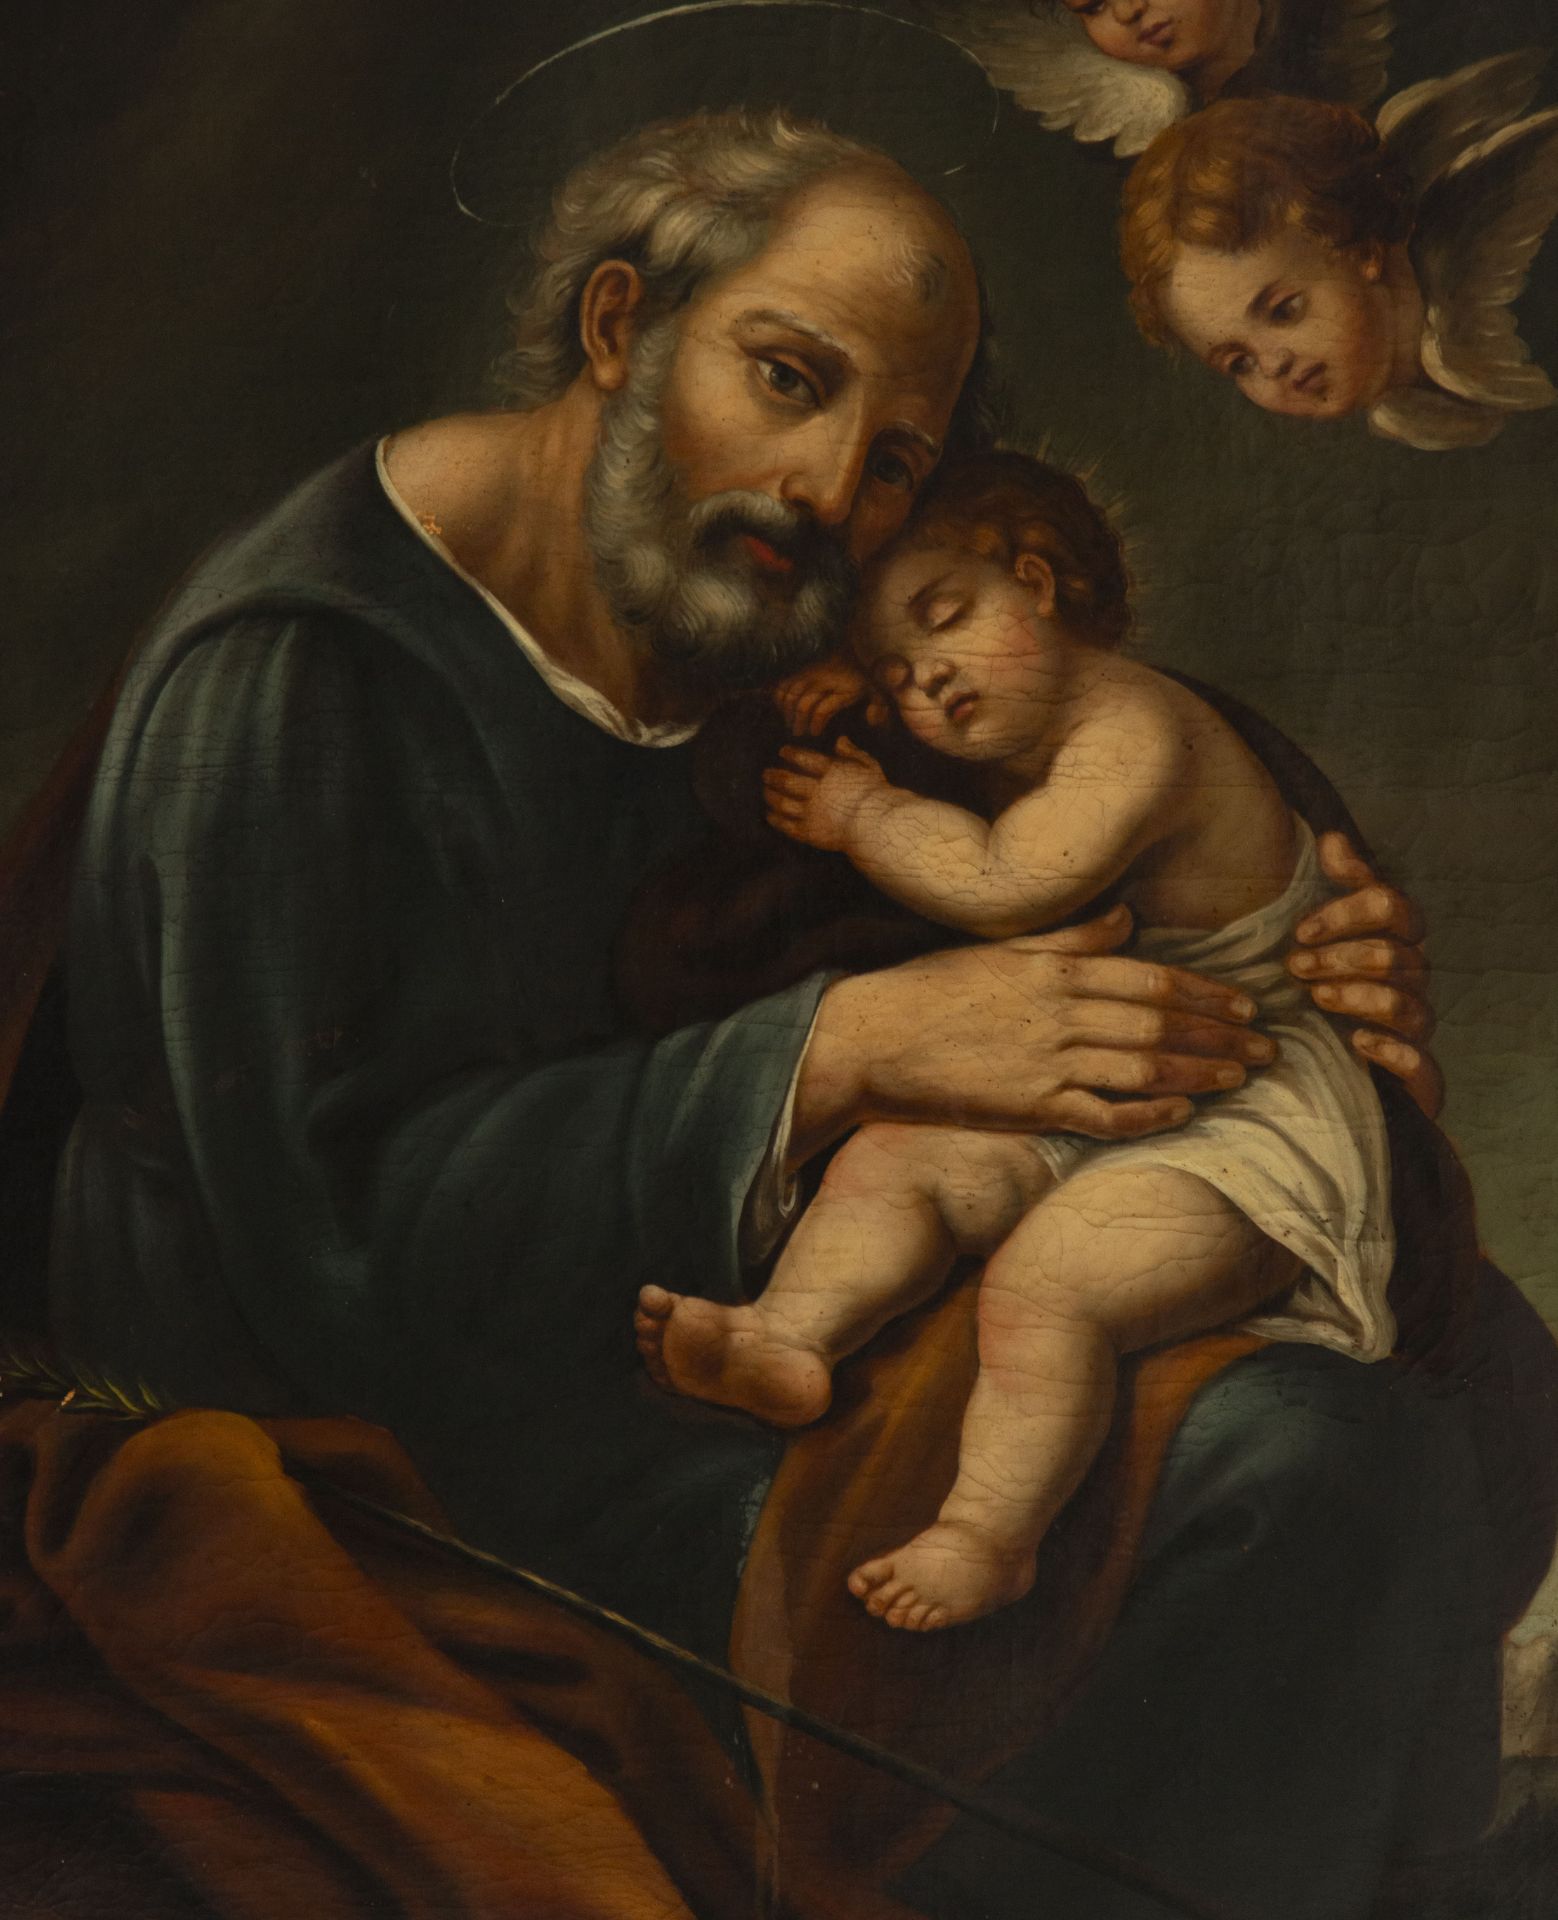 Saint Joseph with Child in Arms, 18th century Central American colonial school, Guatemala, Viceroyal - Image 2 of 4